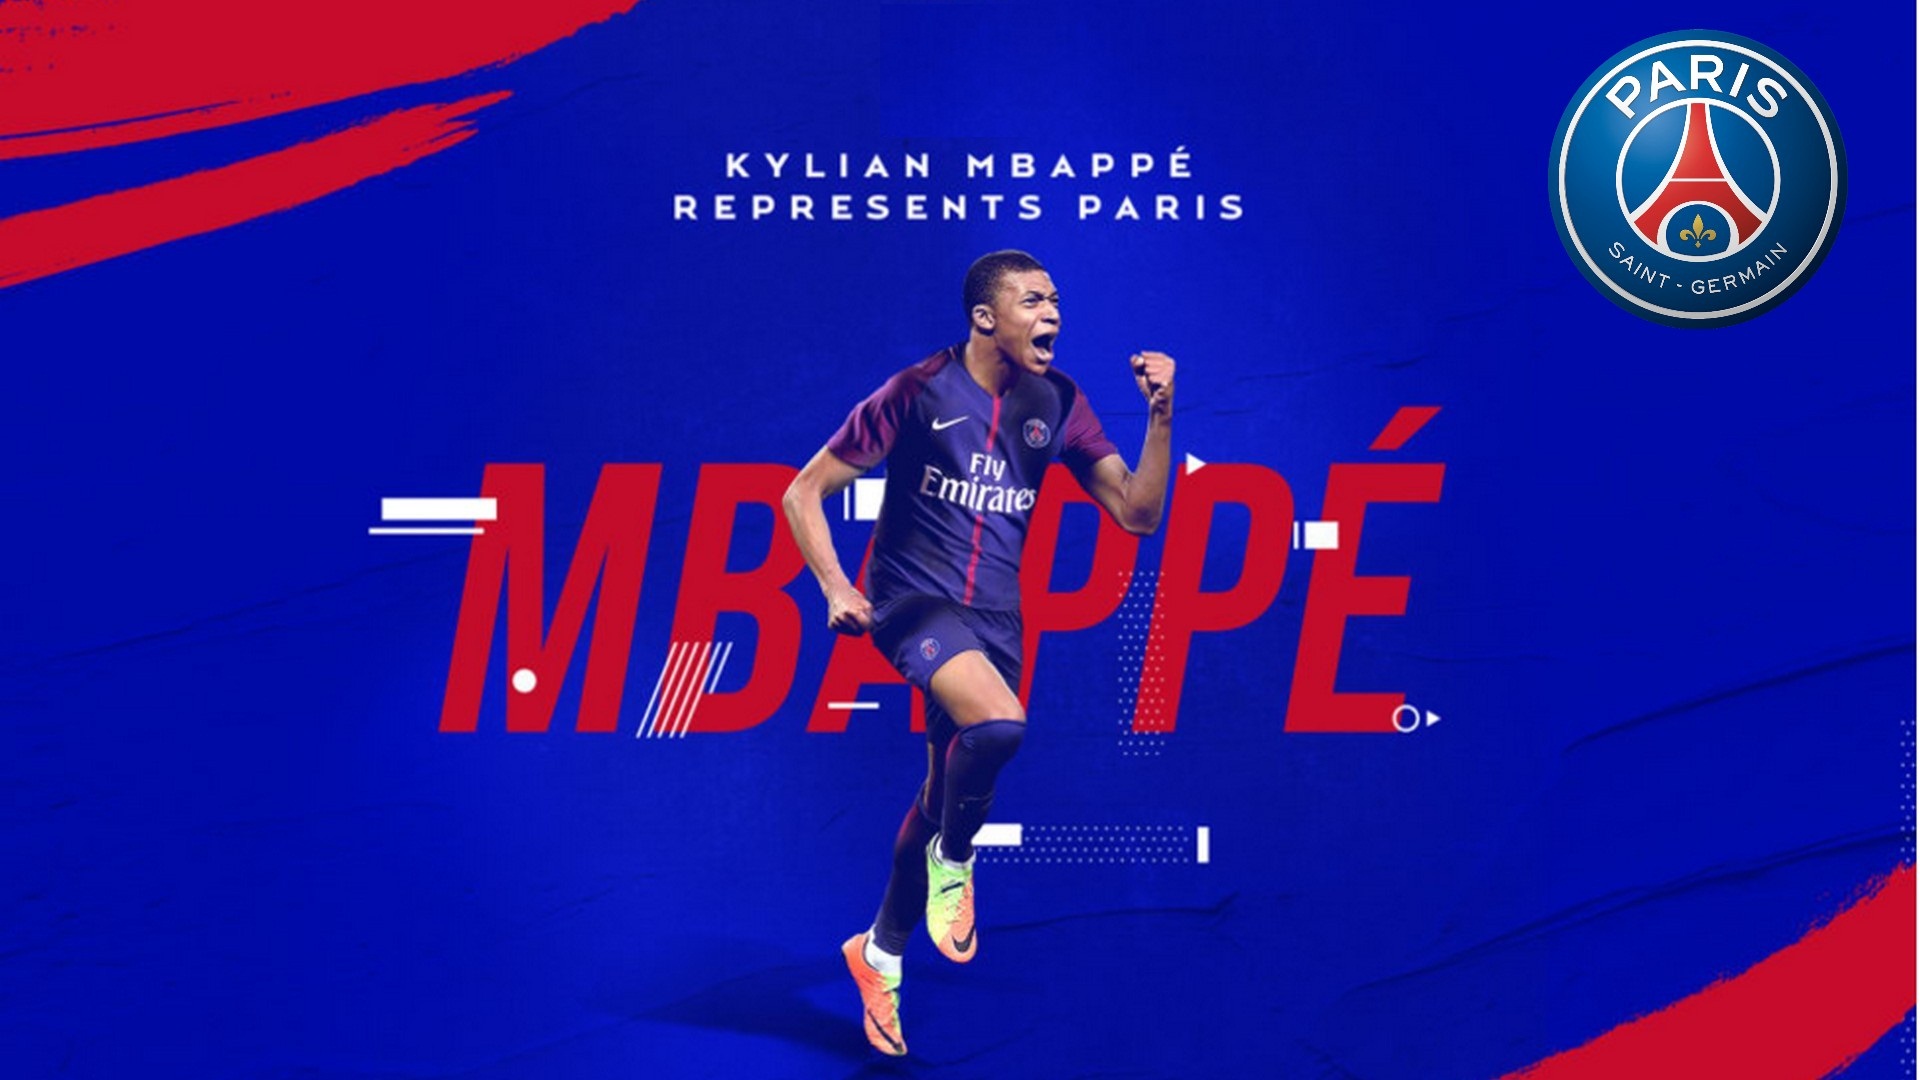 Wallpaper Desktop Kylian Mbappe PSG HD with resolution 1920x1080 pixel. You can make this wallpaper for your Mac or Windows Desktop Background, iPhone, Android or Tablet and another Smartphone device